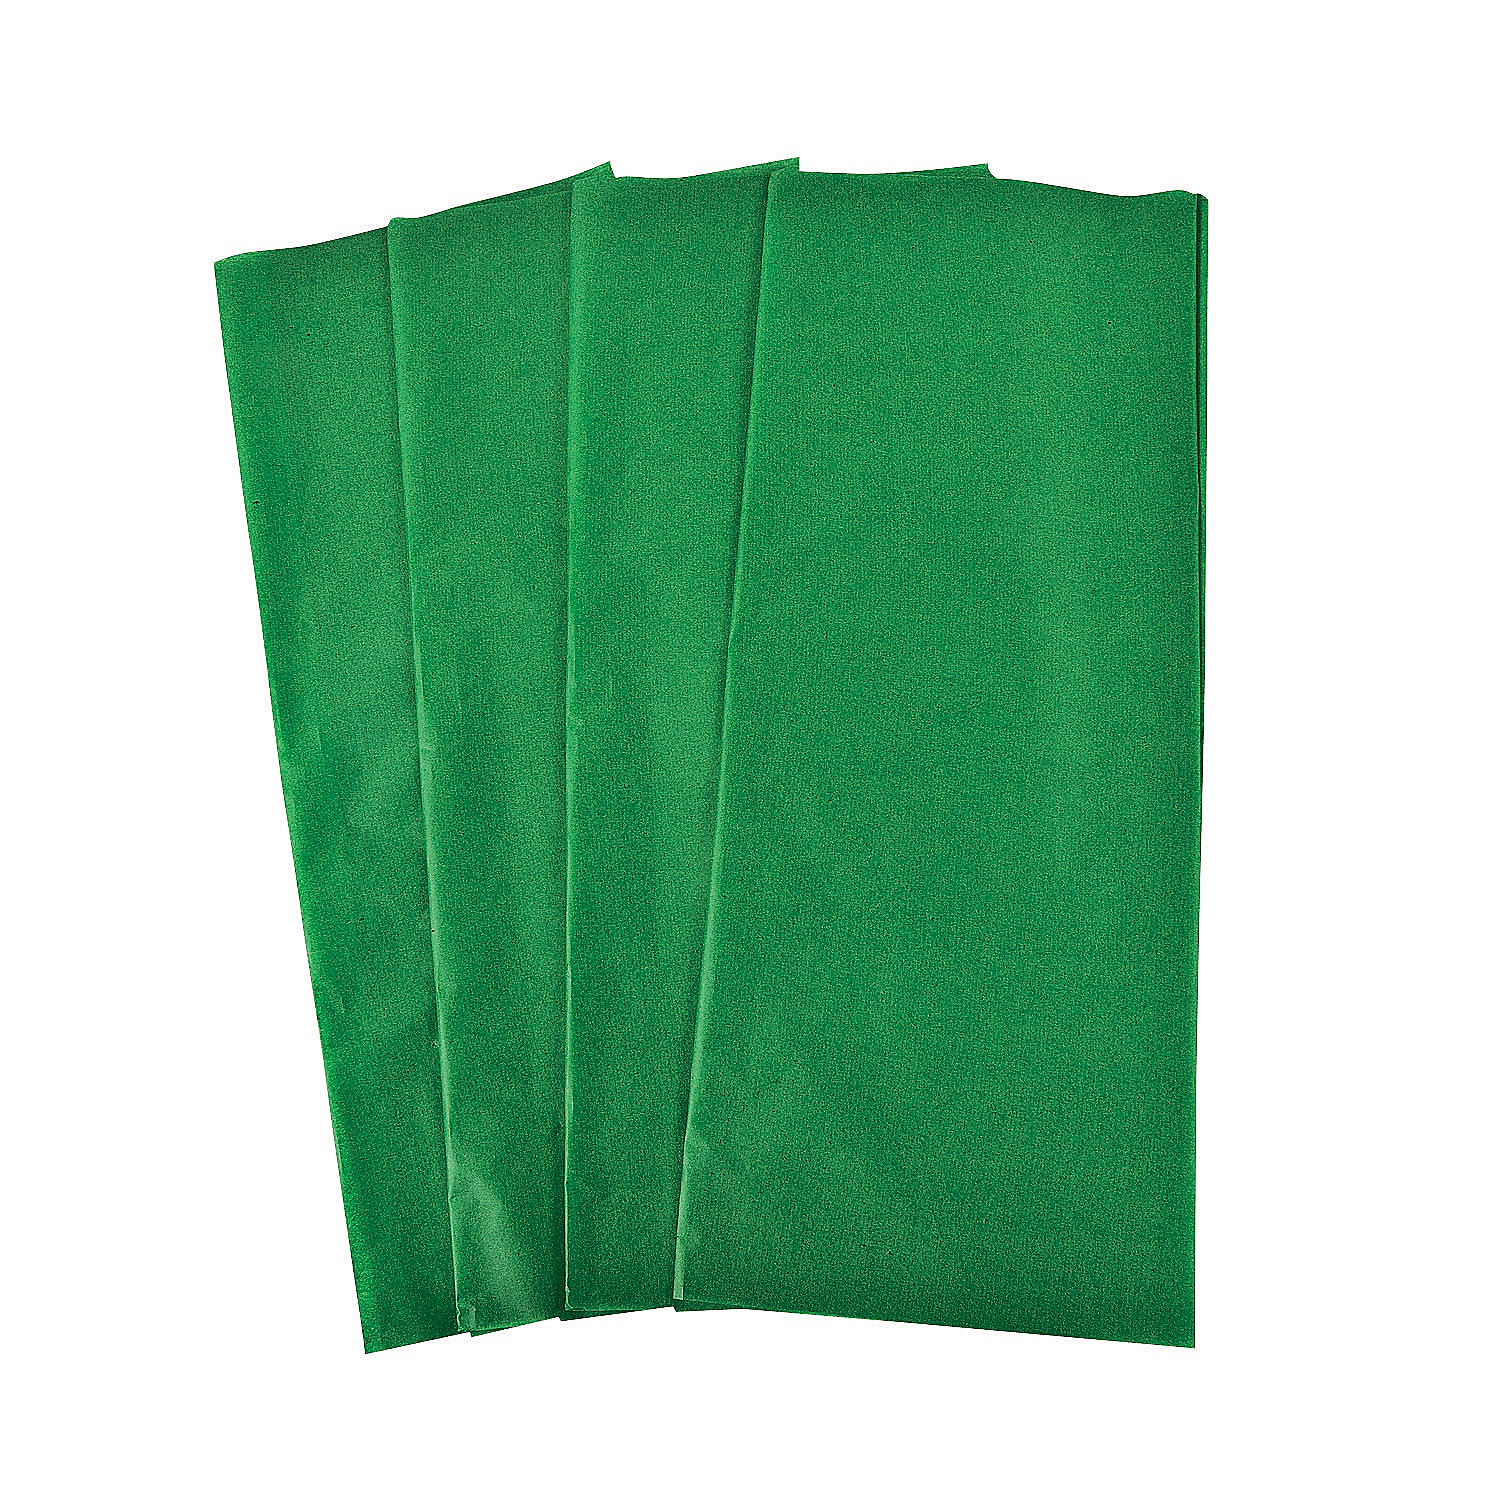 green-tissue-paper-sheets-60-pc-_48_7368